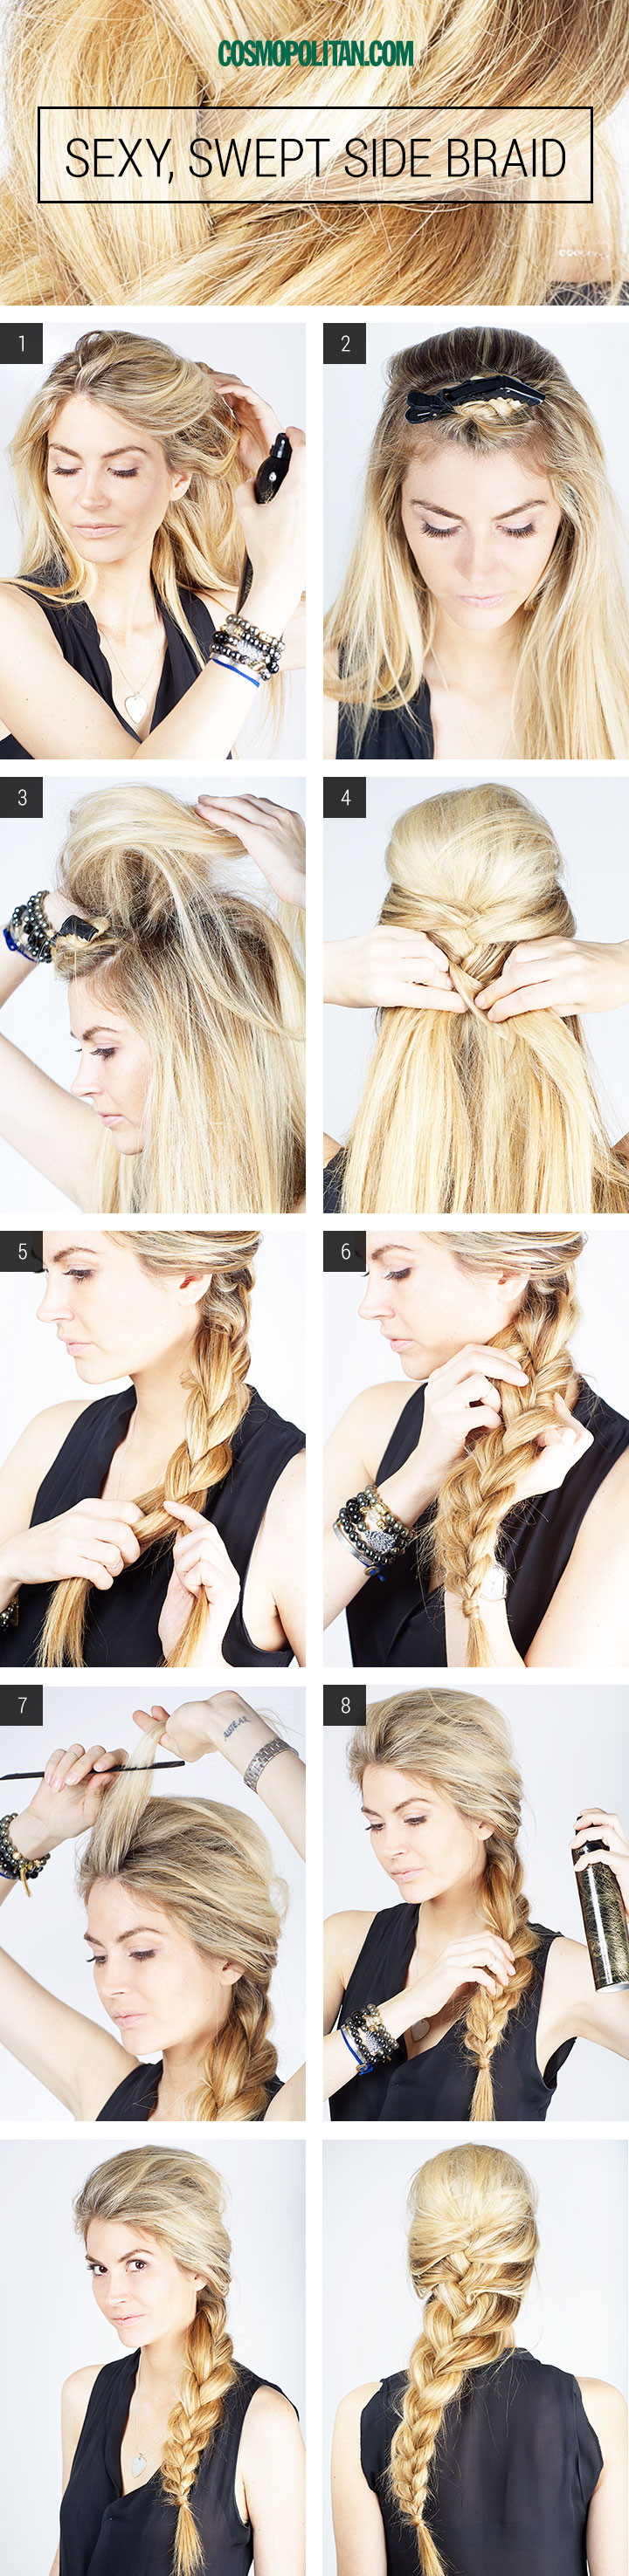 Easy Hairstyles  Every Woman Can Do in Five Minutes